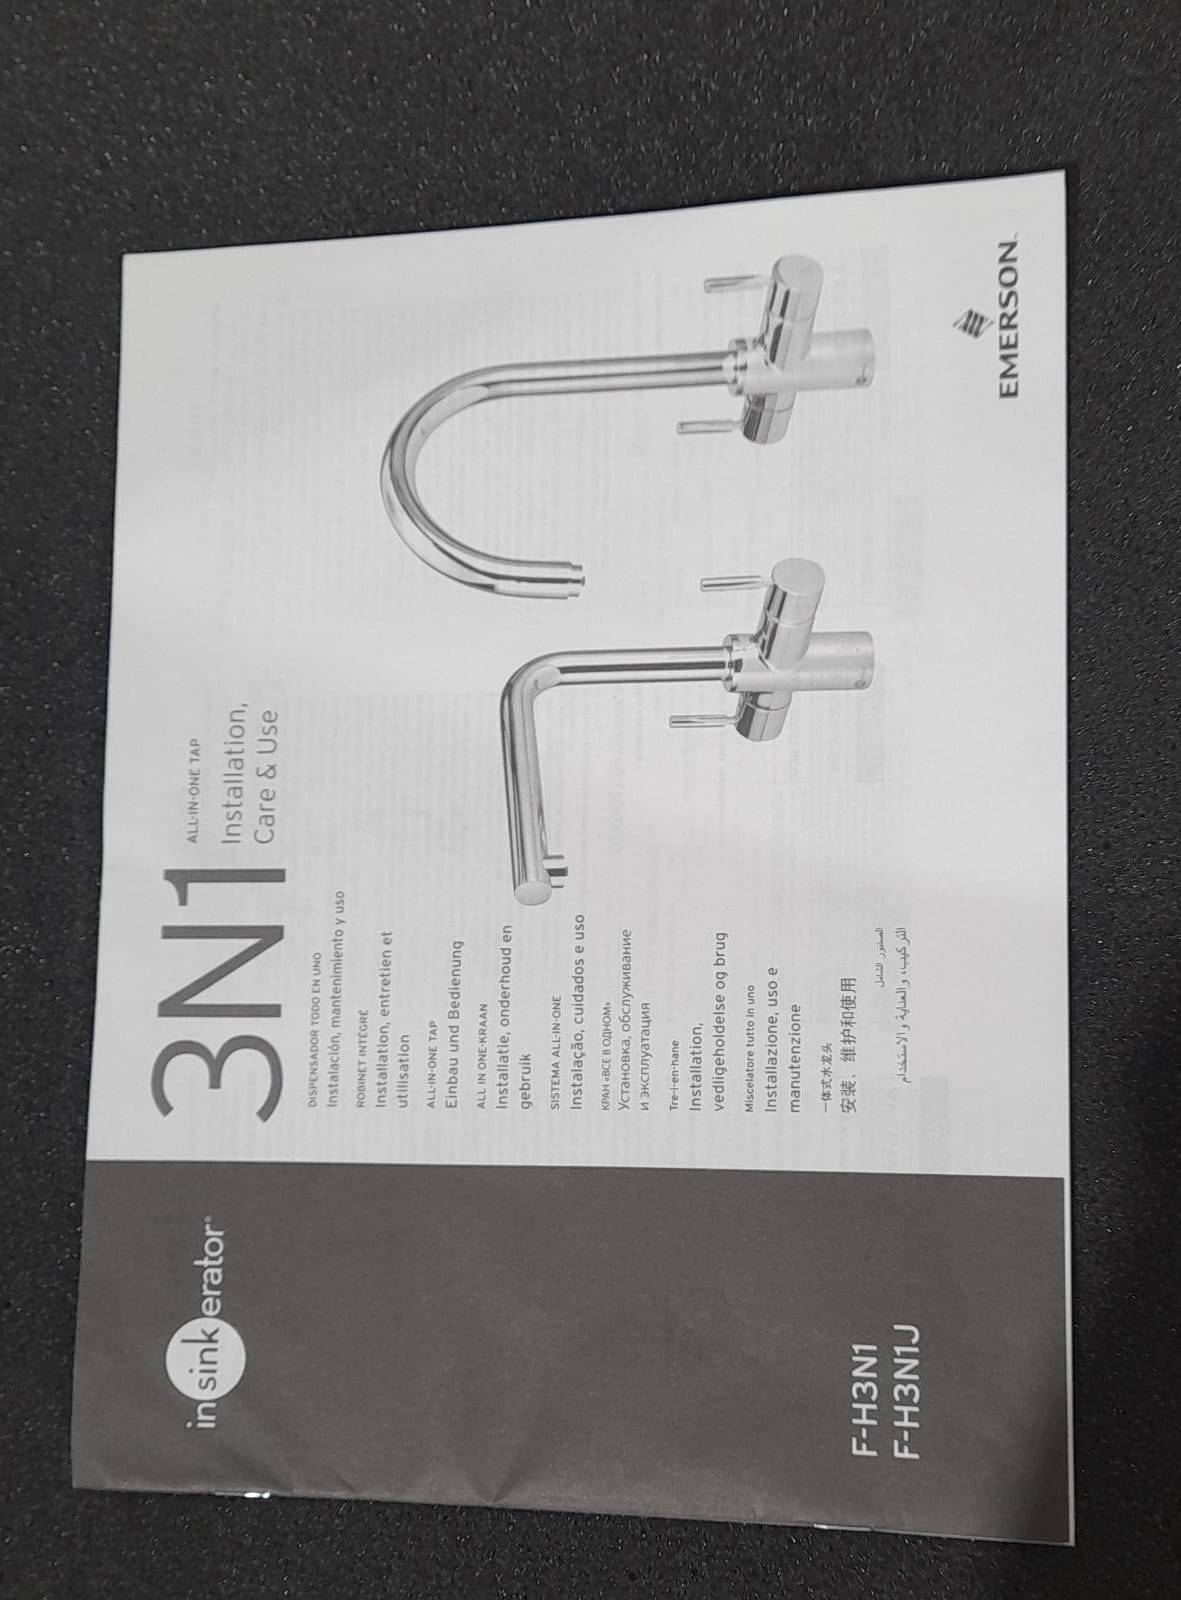 InSinkErator 3N1 Chrome effect Filtered steaming, Hot & Cold Water Tap Only-8933